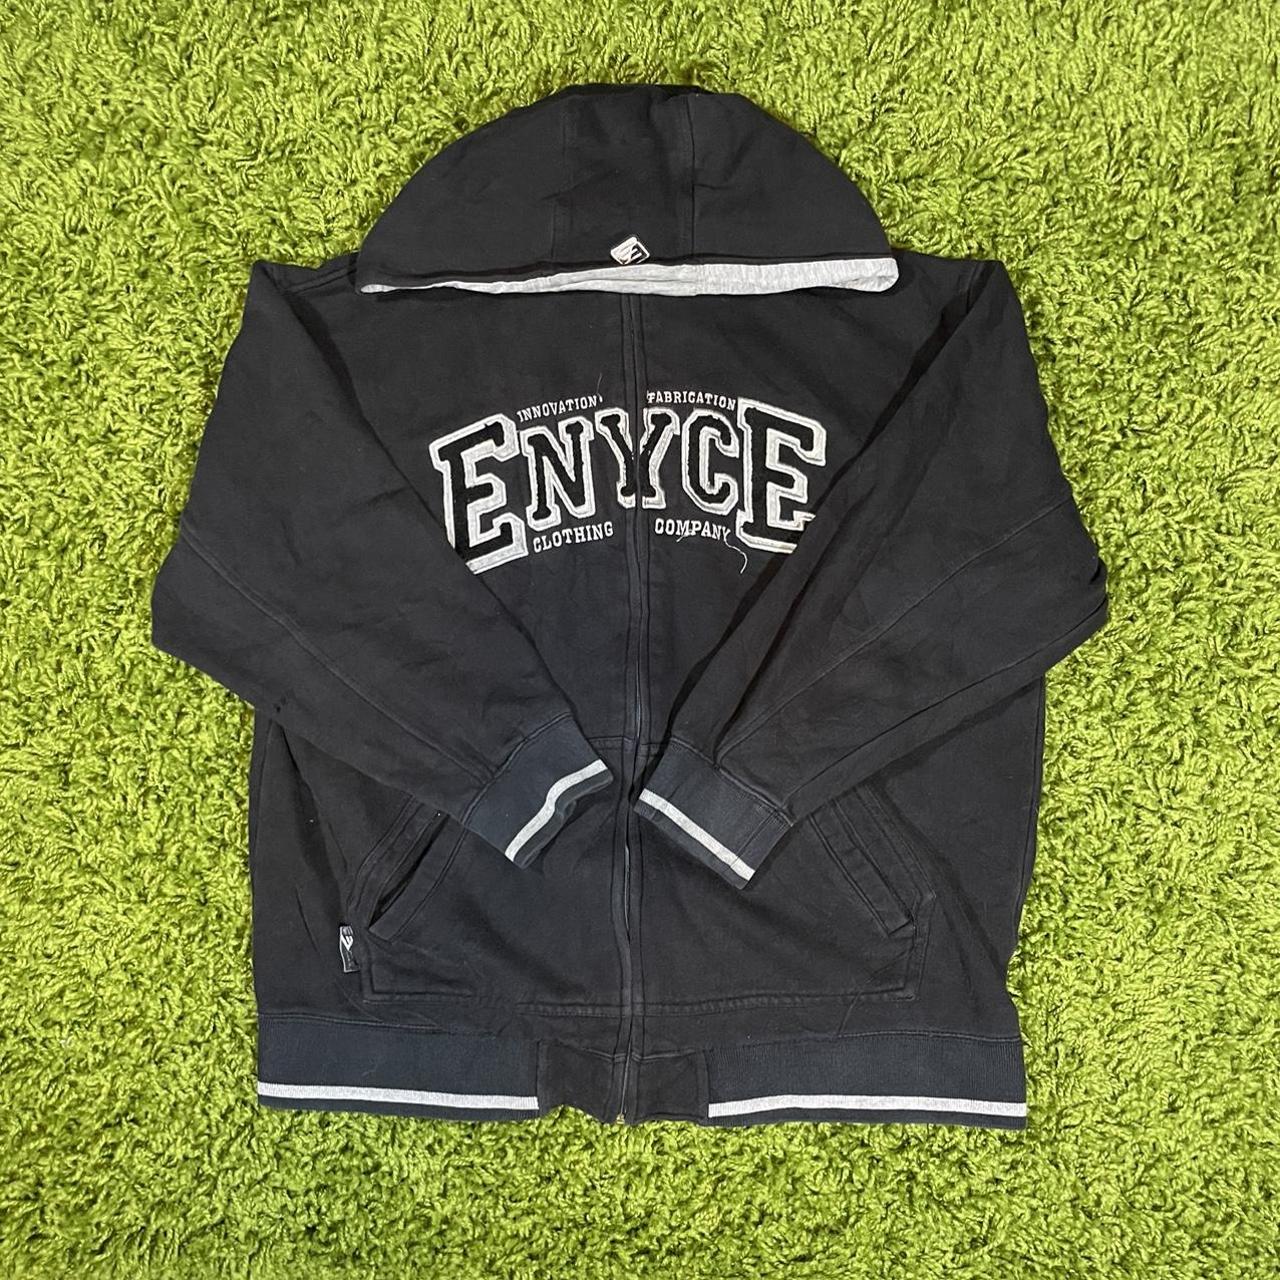 Enyce Zip Up 21x26 - - - - mma elite tapout... - Depop